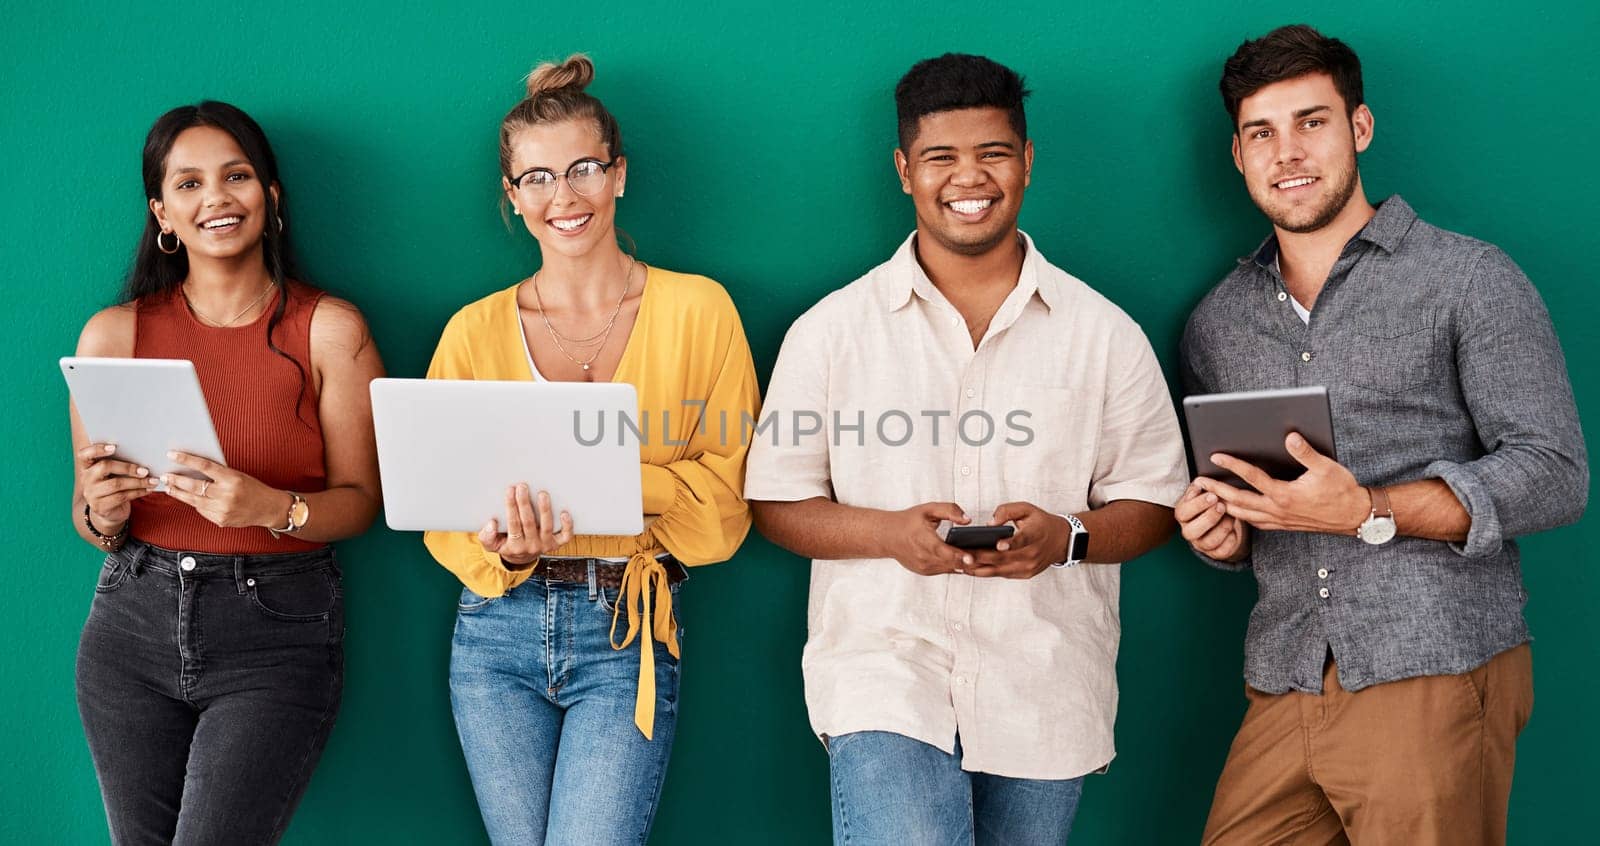 We use social media to connect and engage with customers. Portrait of a group of young designers using digital devices while standing together against a green background. by YuriArcurs